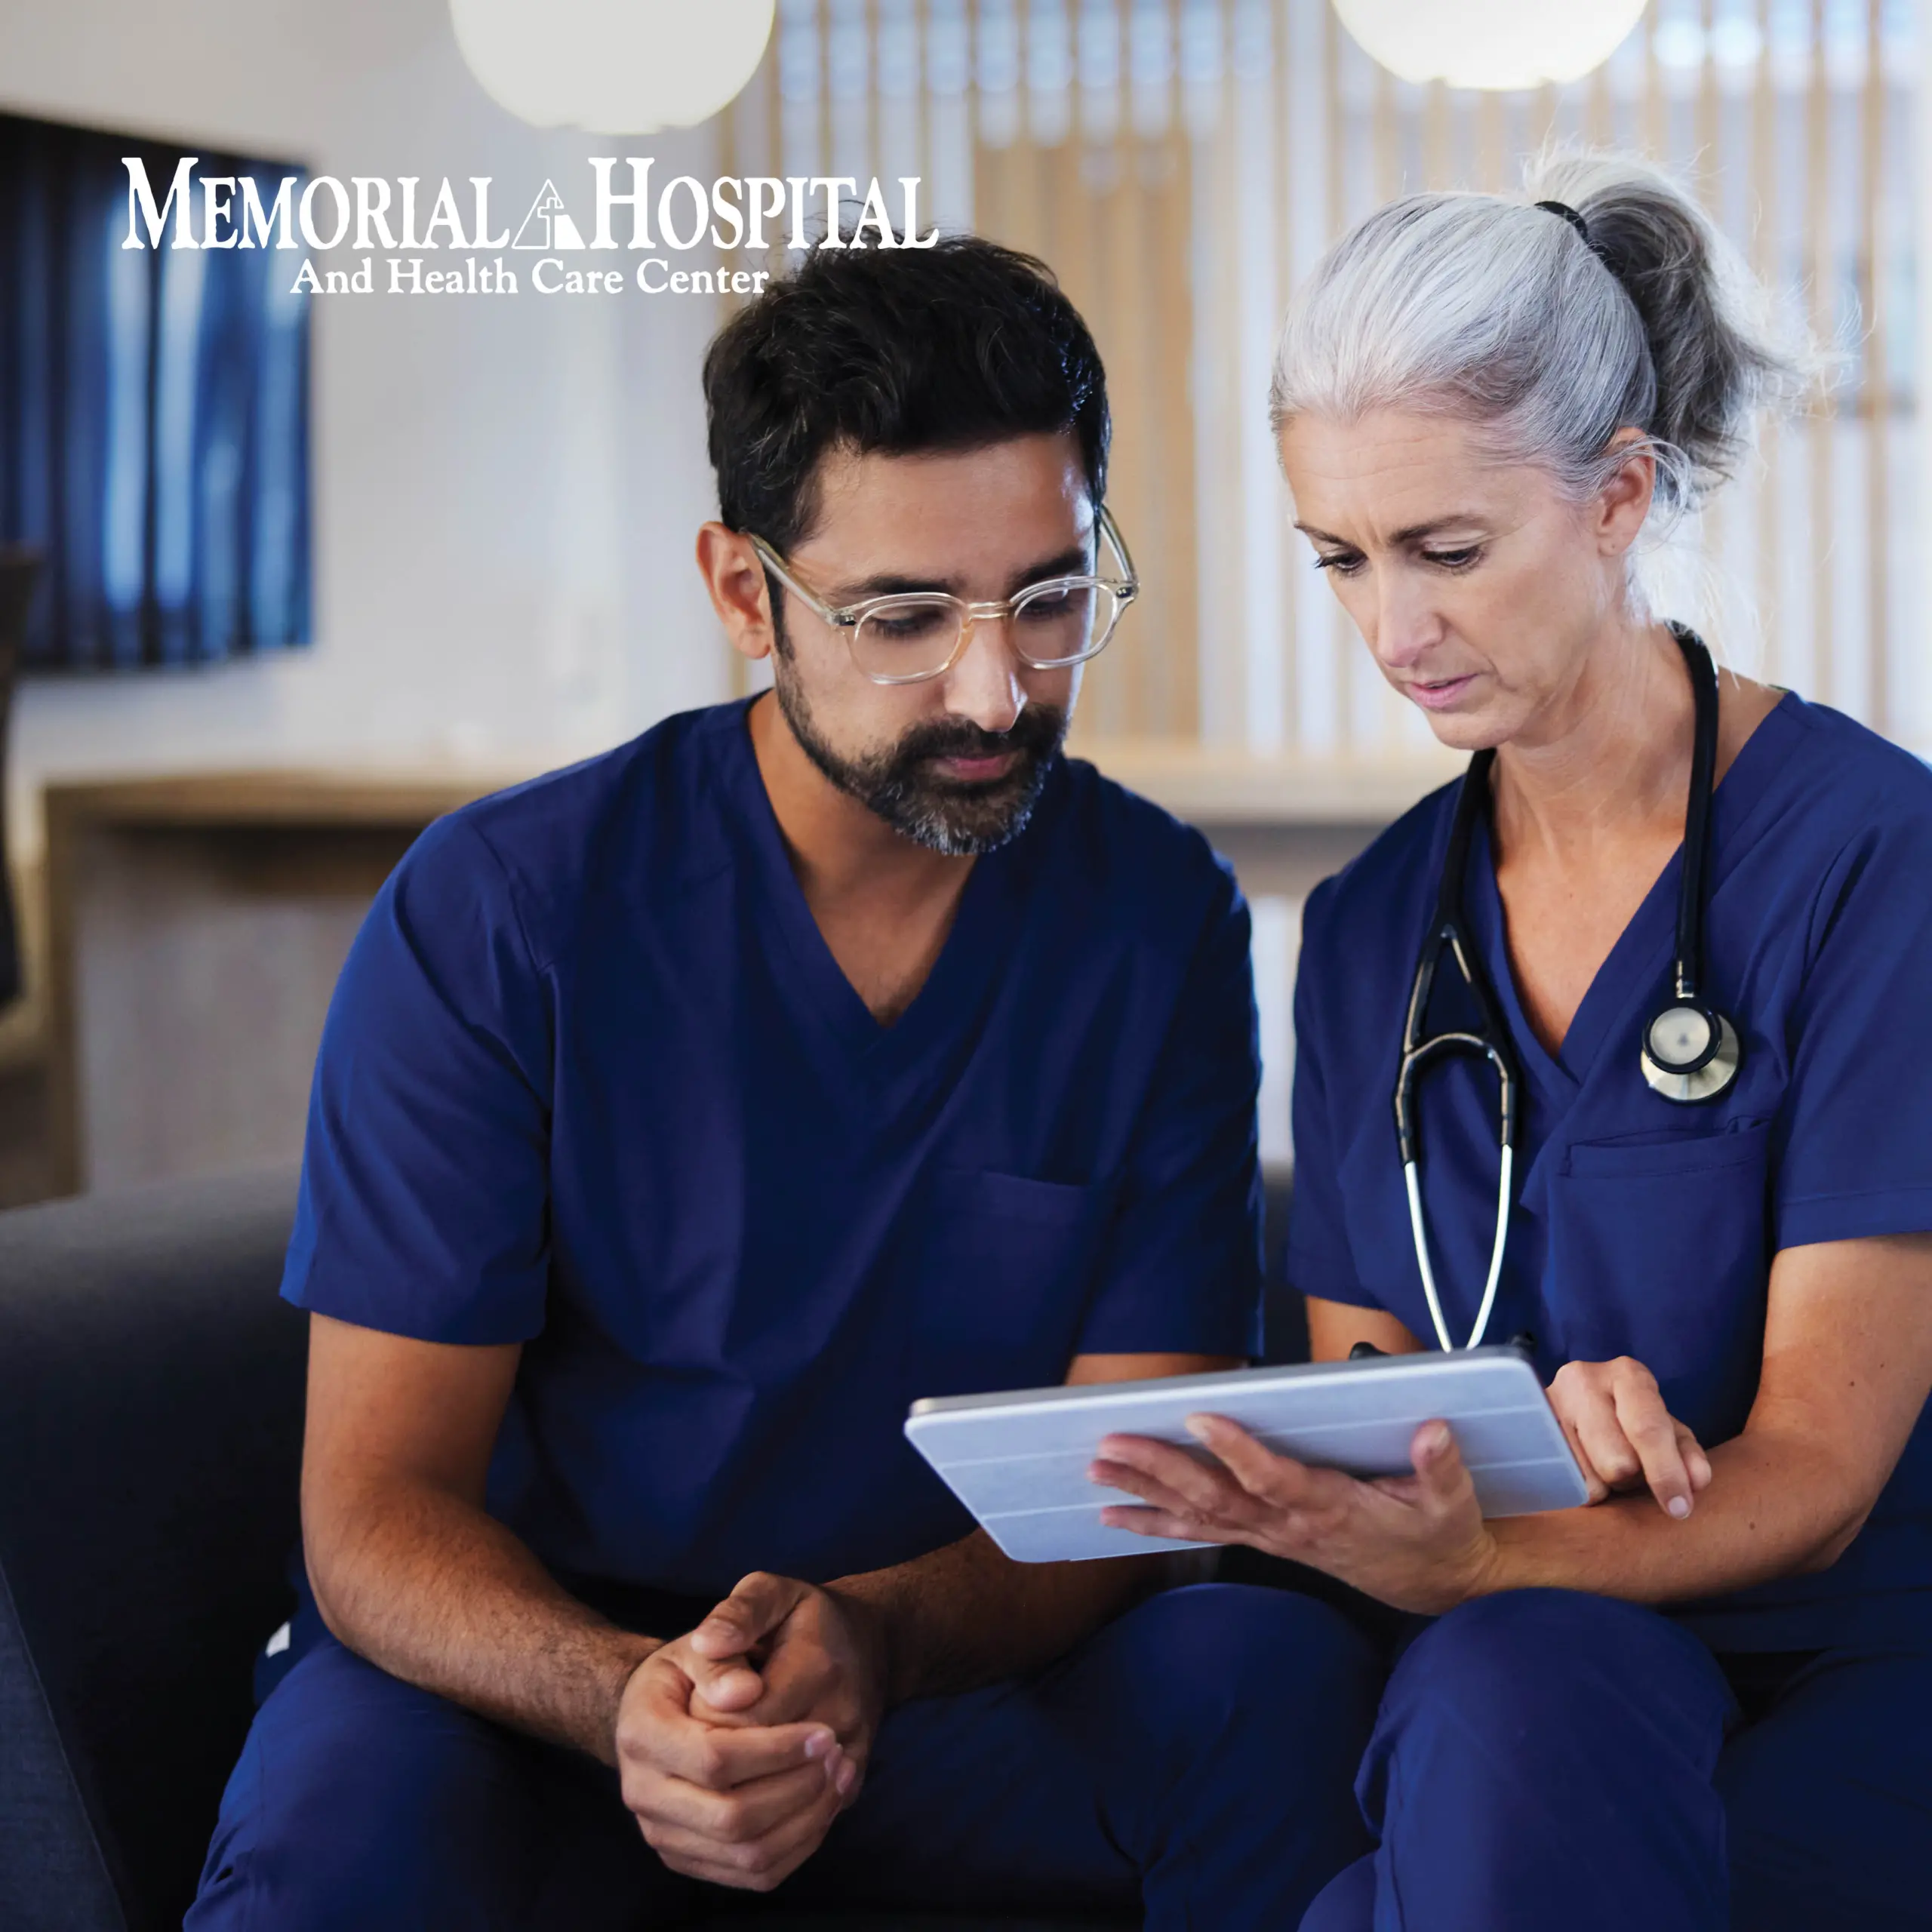 Two medical professionals with their stethoscope viewing information stored on the cloud via tablet. Text in the top left corner reads “Memorial Hospital And Health Care Center”.